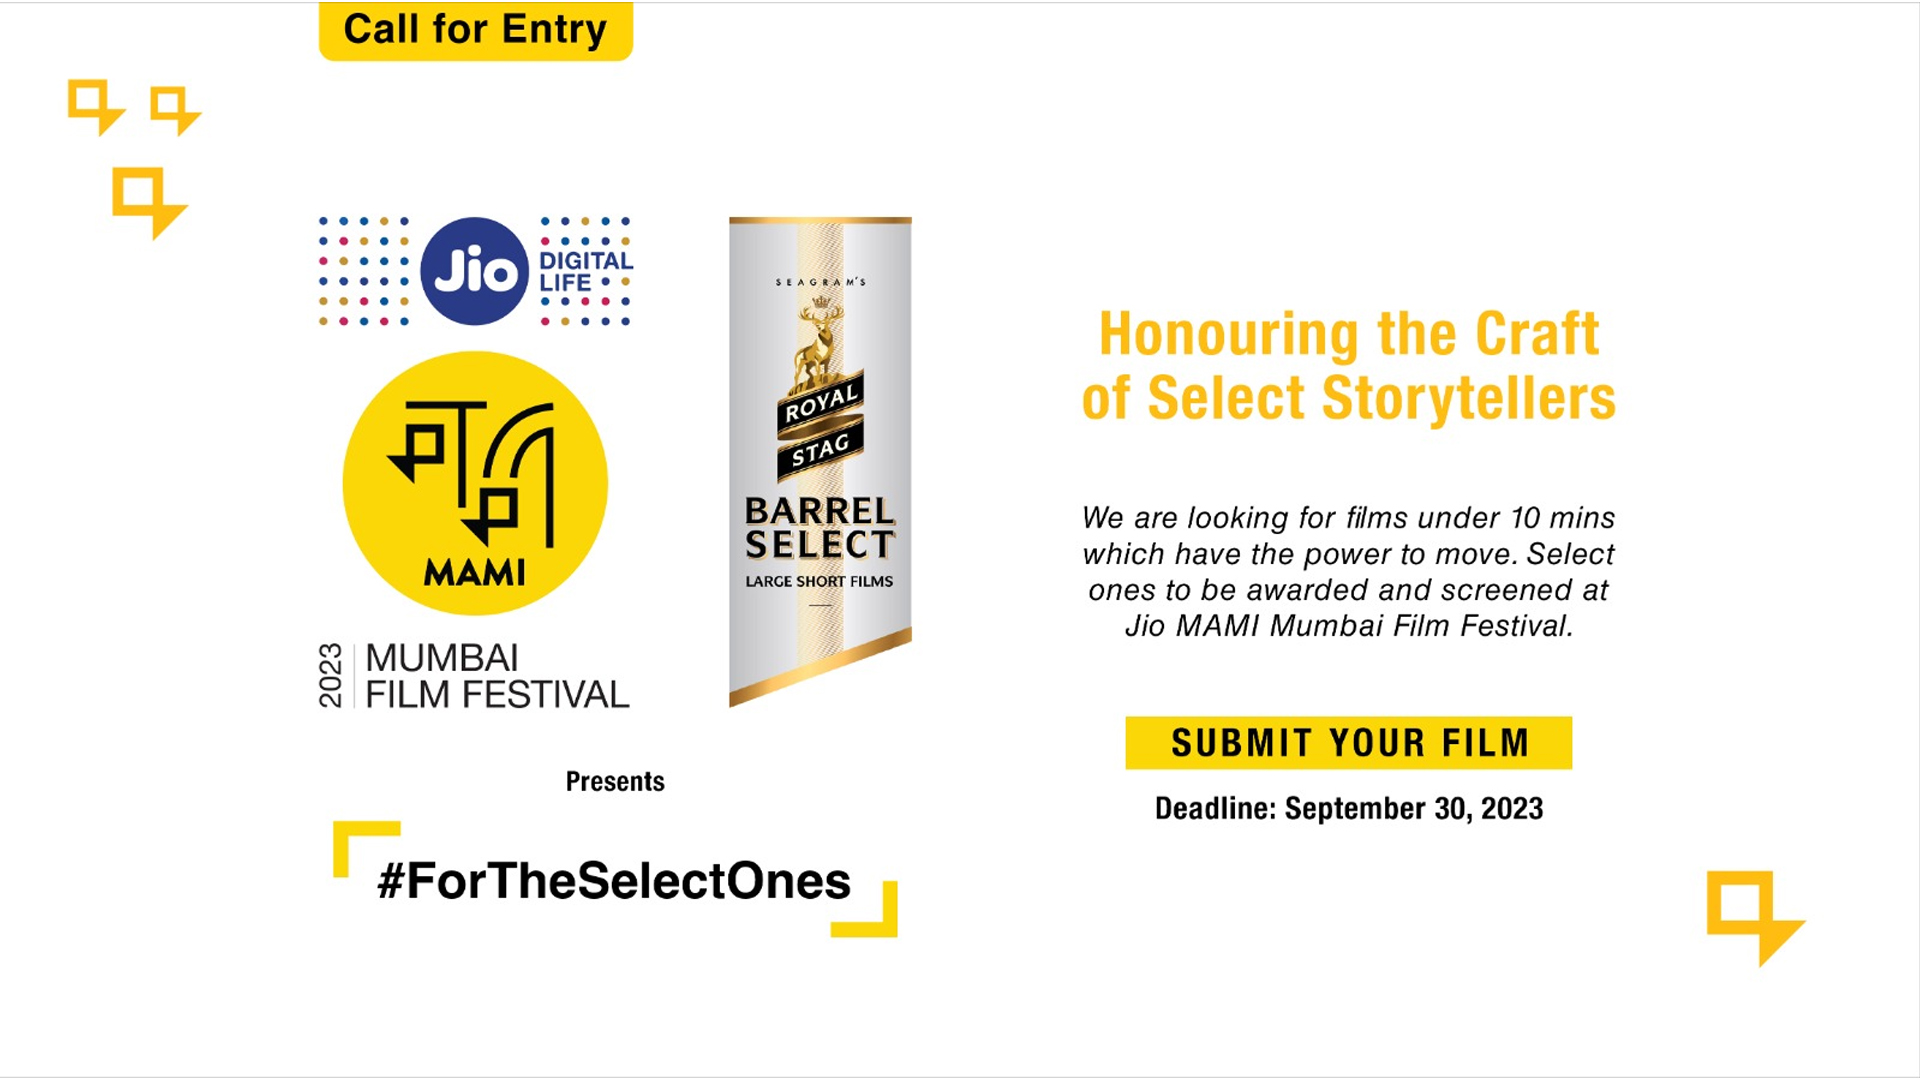 Jio MAMI and Royal Stag Barrel Select Large Short Films come together to celebrate cinema excellence in short film formats.